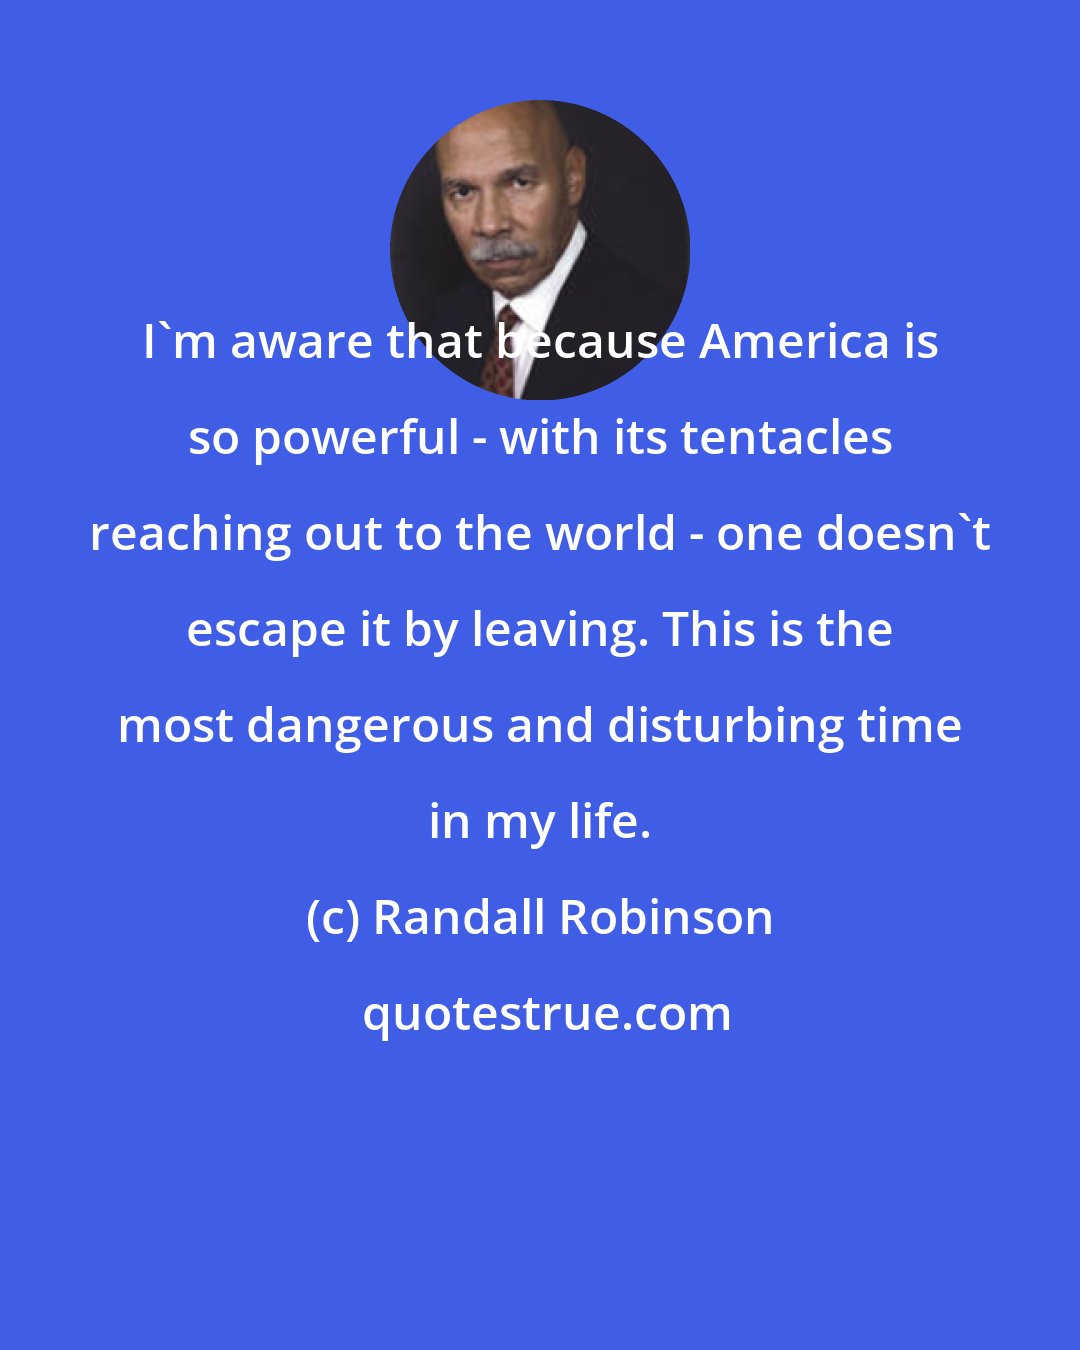 Randall Robinson: I'm aware that because America is so powerful - with its tentacles reaching out to the world - one doesn't escape it by leaving. This is the most dangerous and disturbing time in my life.